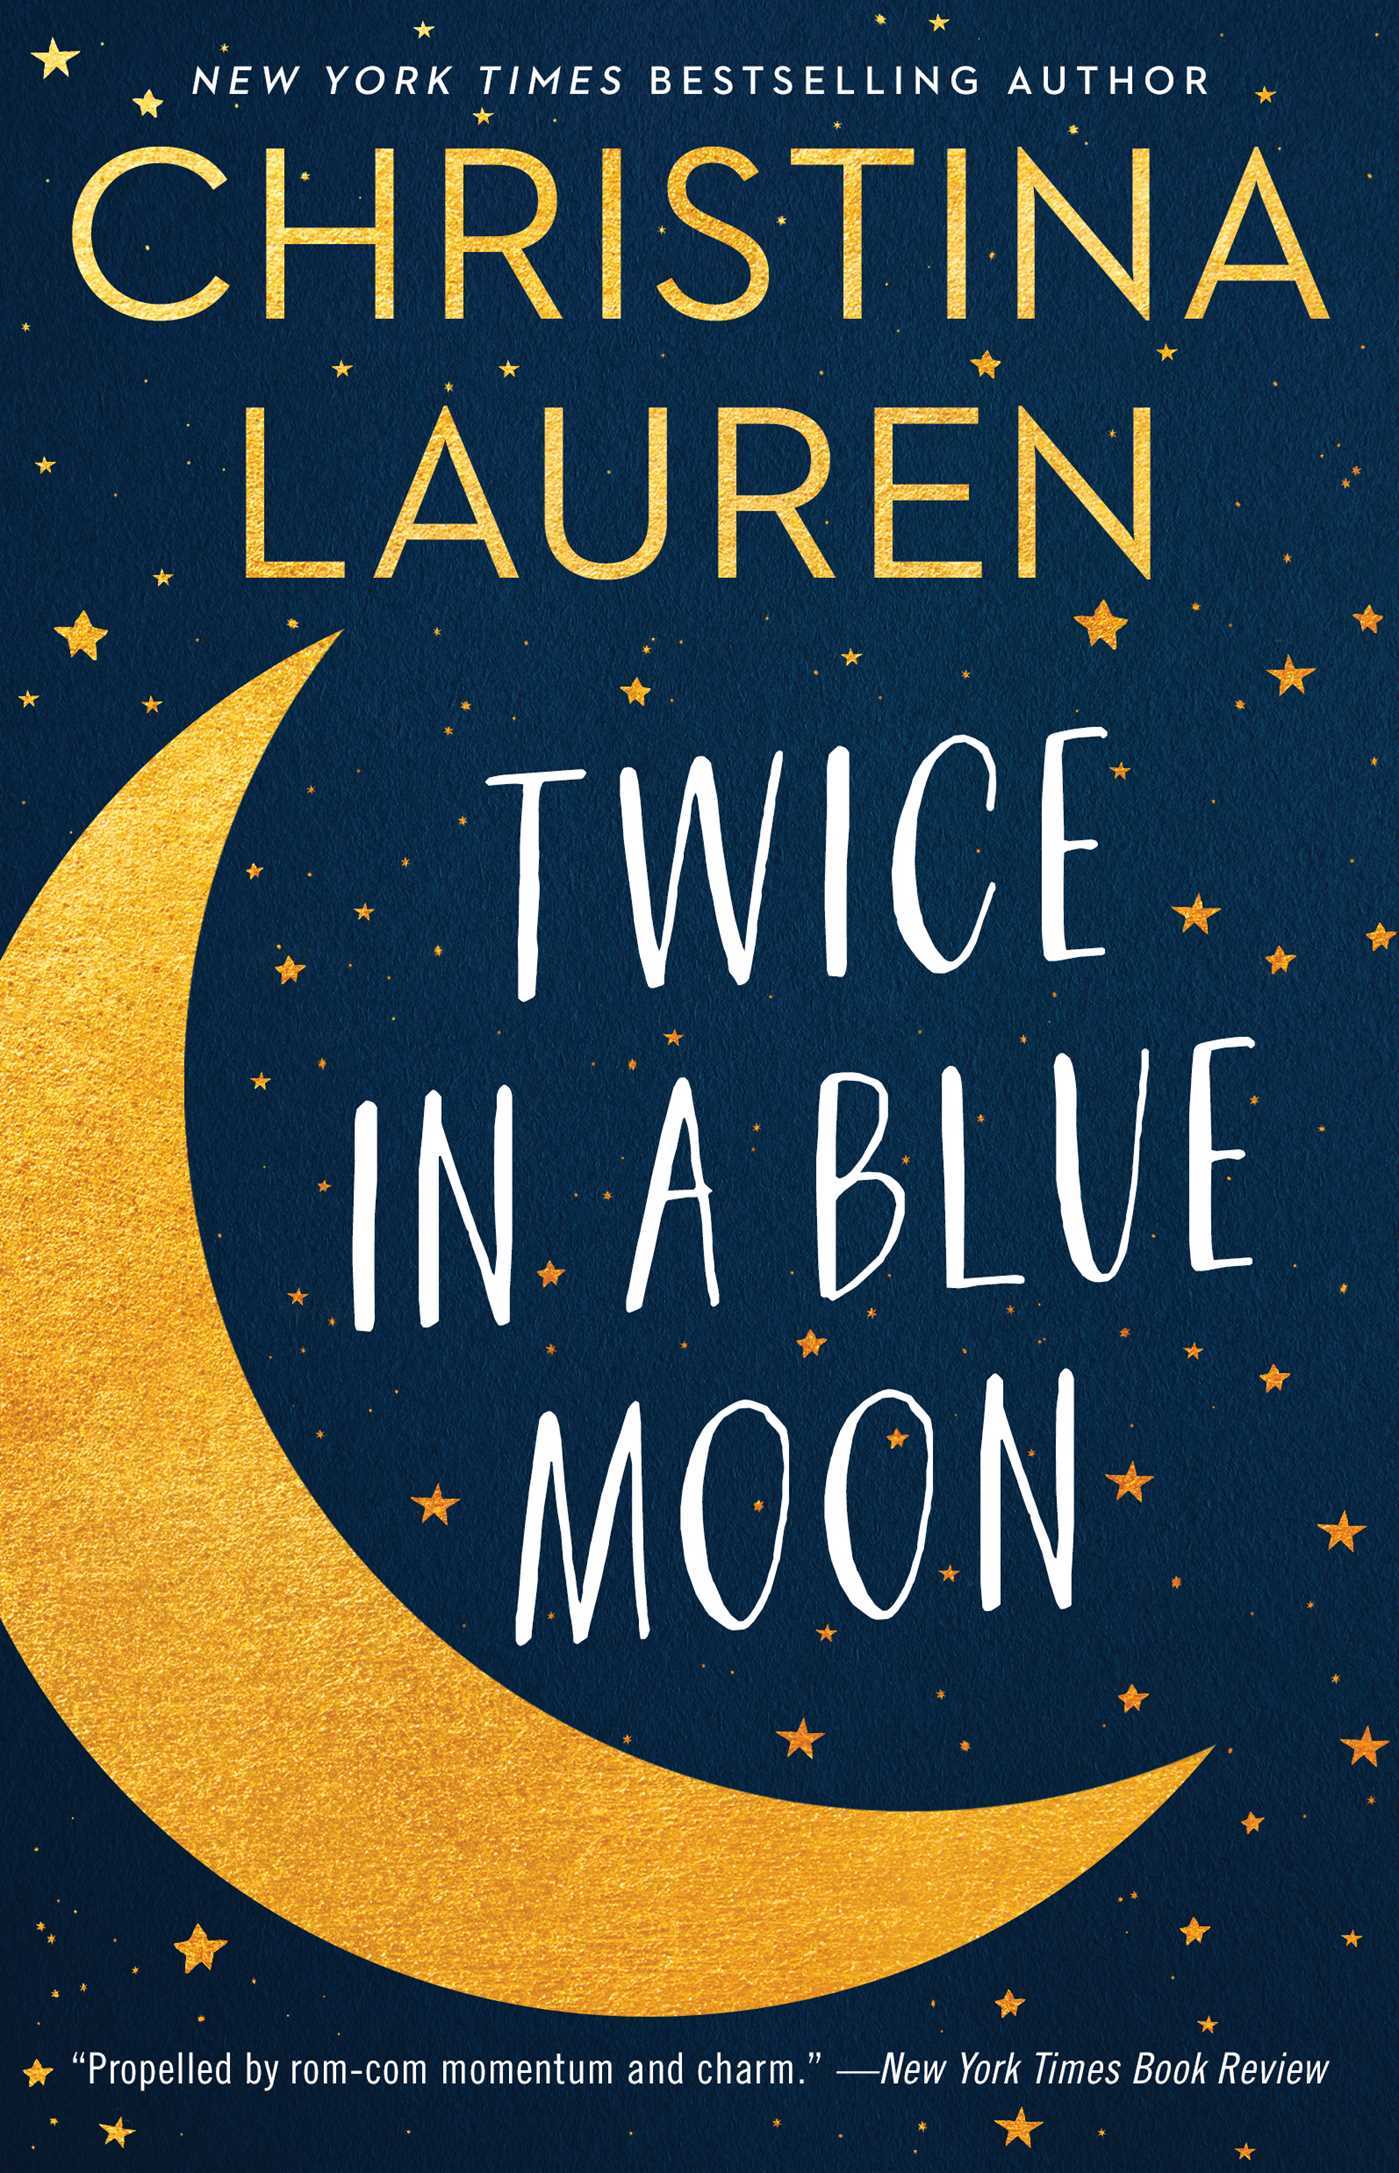 ARC Review: “Twice in a Blue Moon” by Christina Lauren